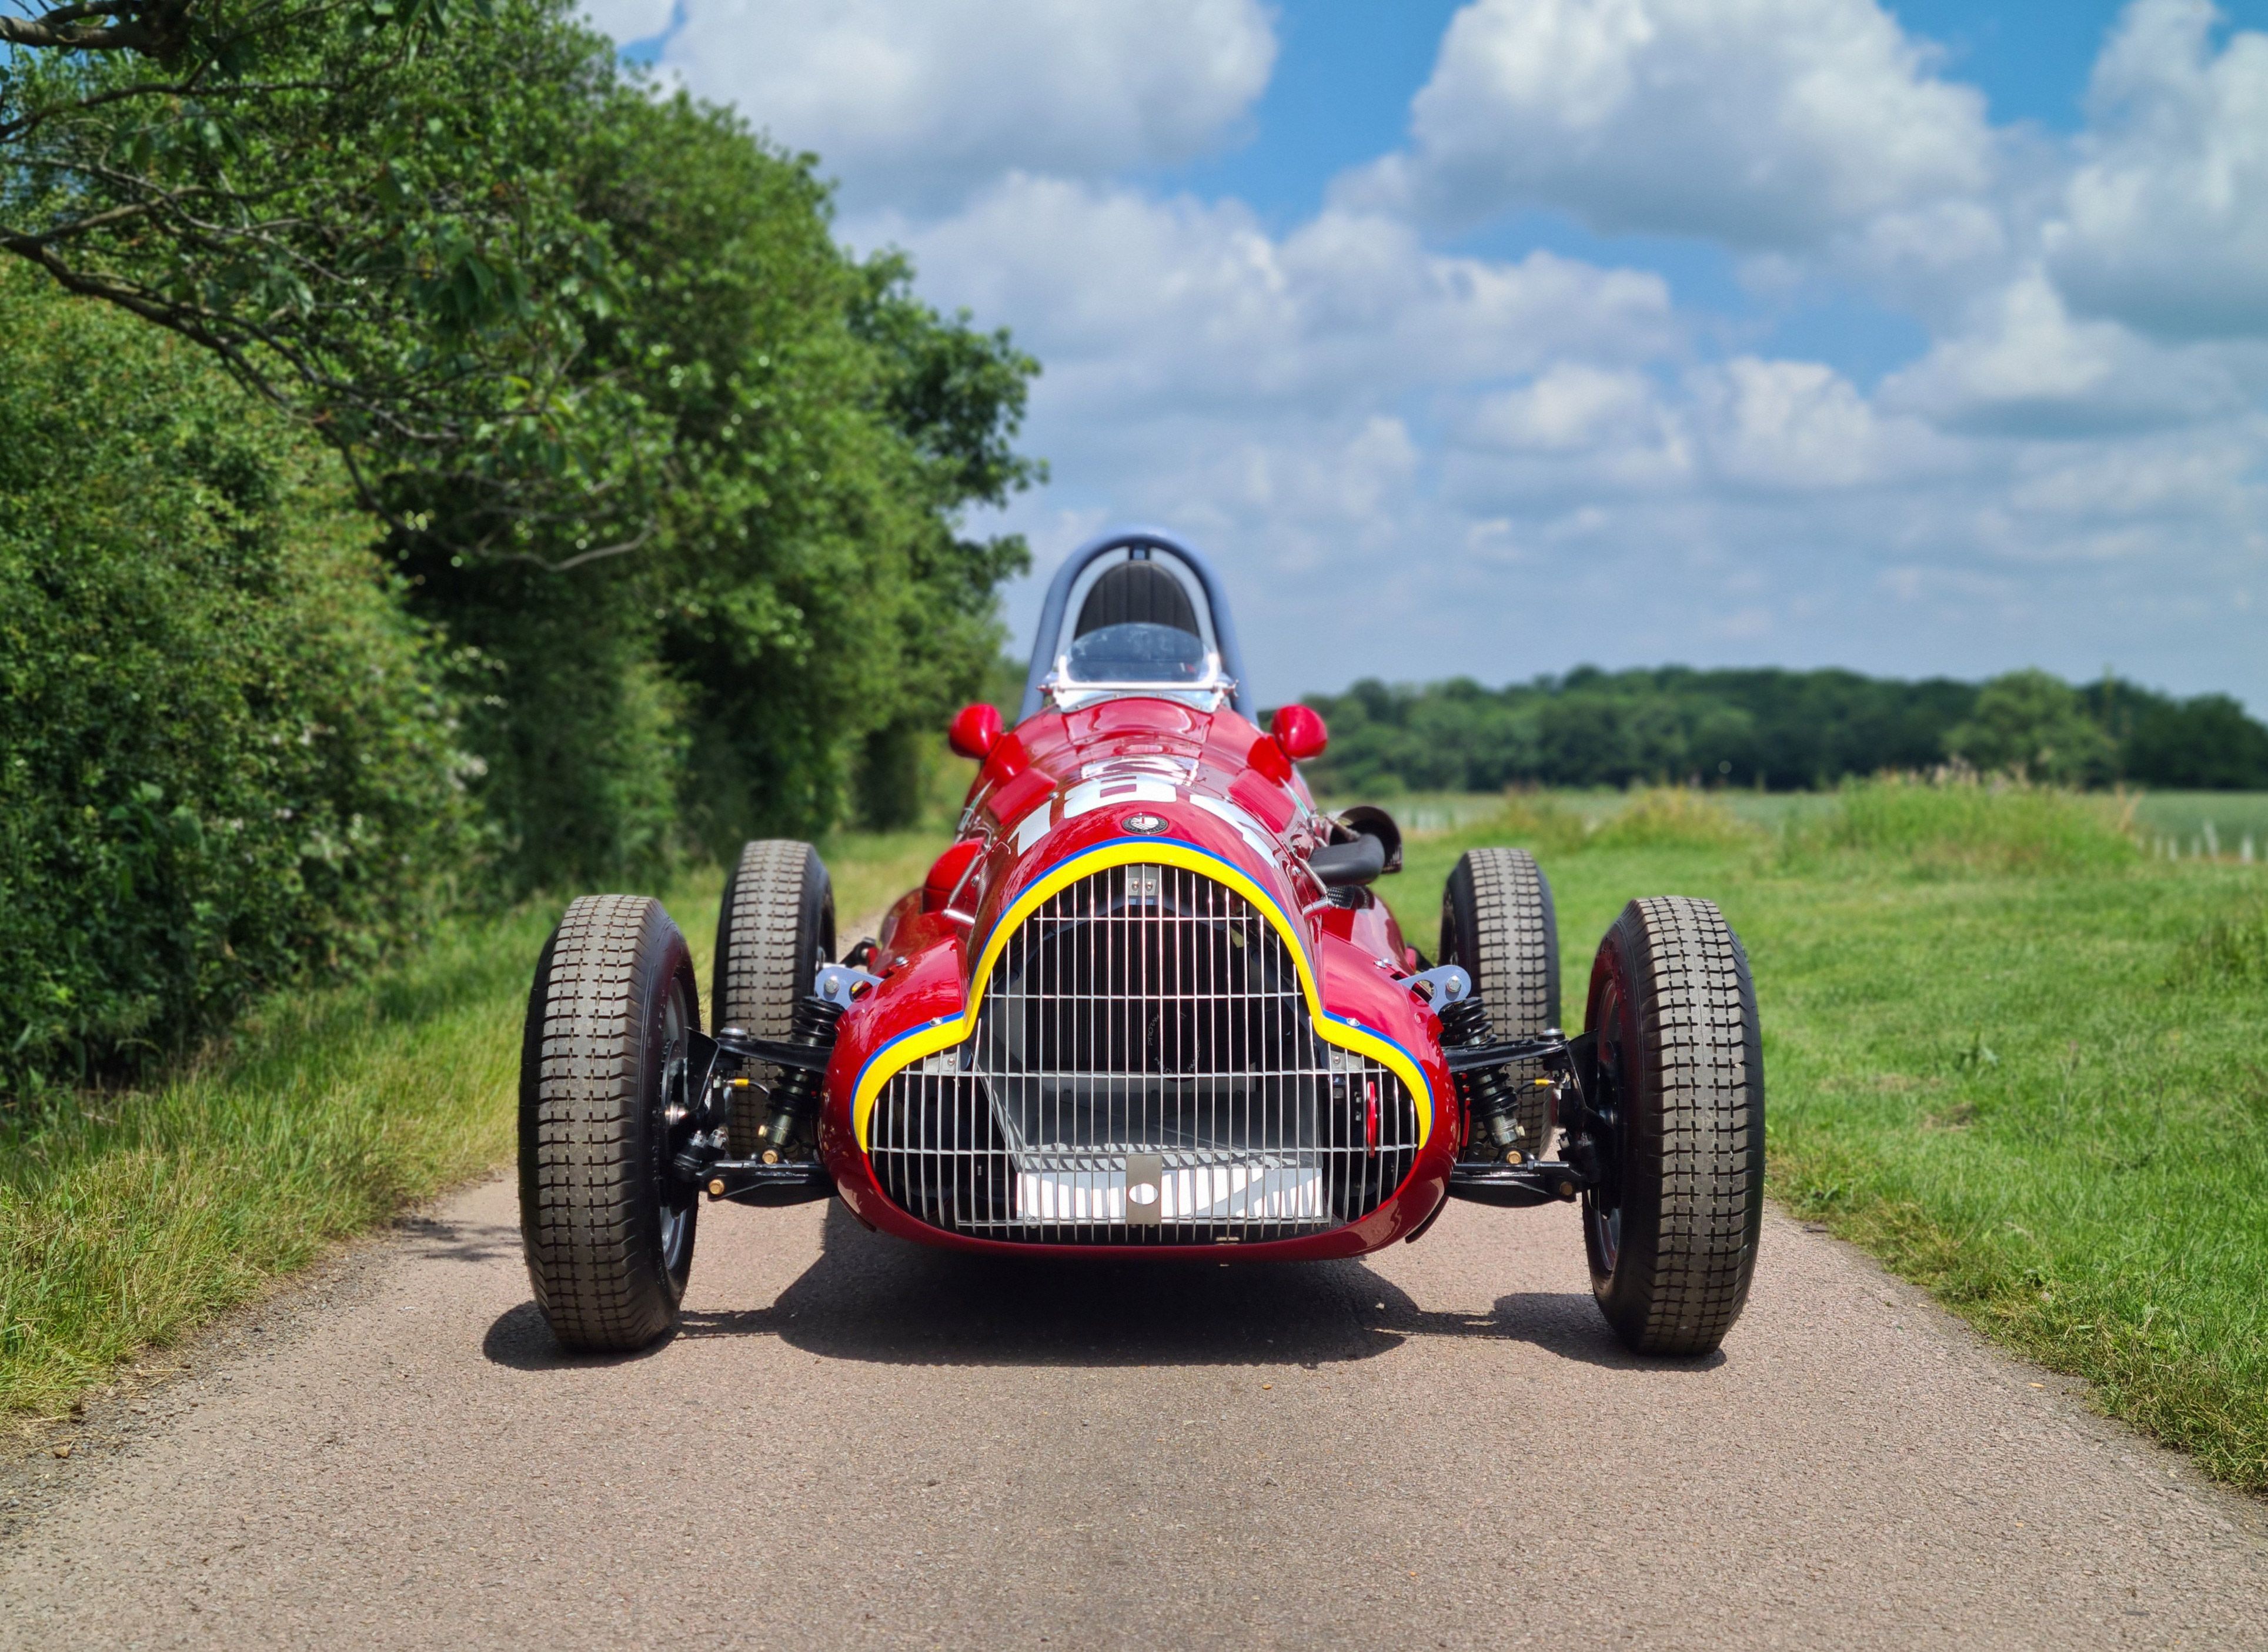 This British Kit Car Could Get Plenty of New People into Racing